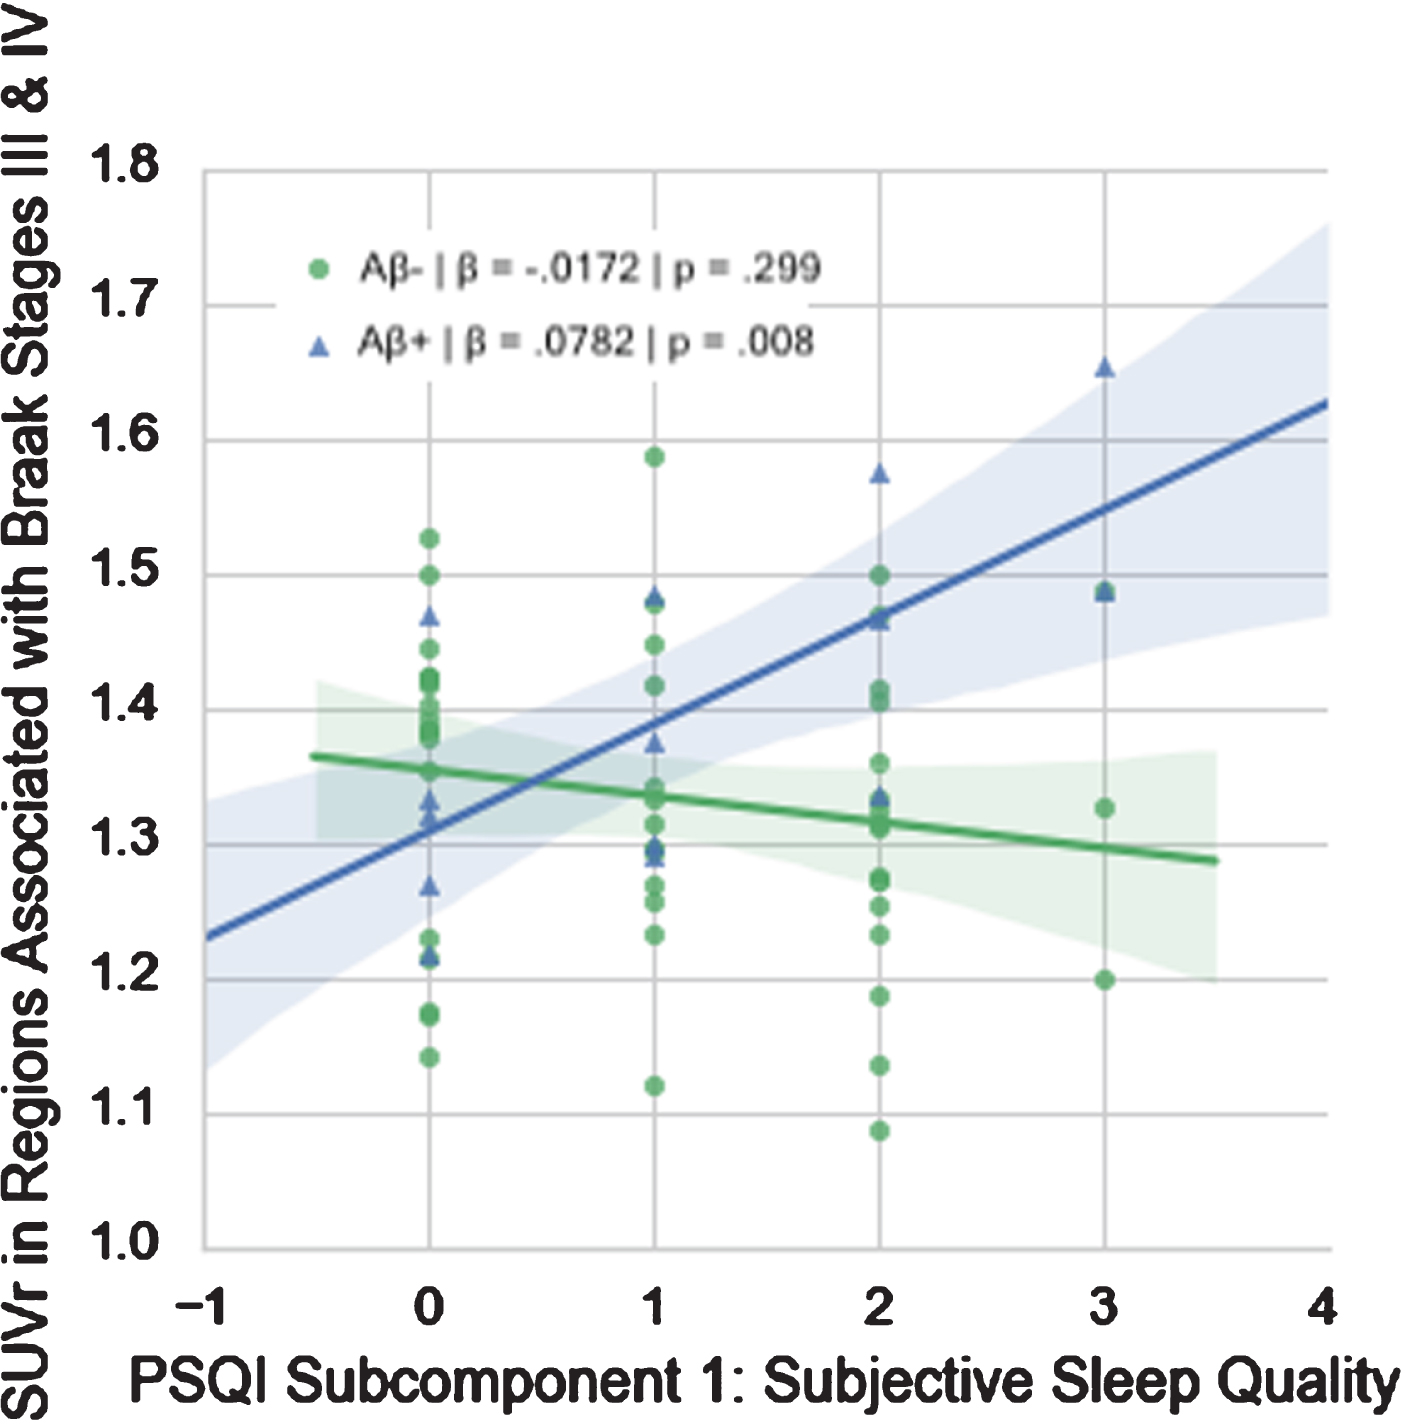 Relationship between PSQI Subcomponent 1 (Subjective Sleep Quality) and FTP SUVr in Regions Associated with Braak Stages III & IV in Aβ+ and Aβ- groups.